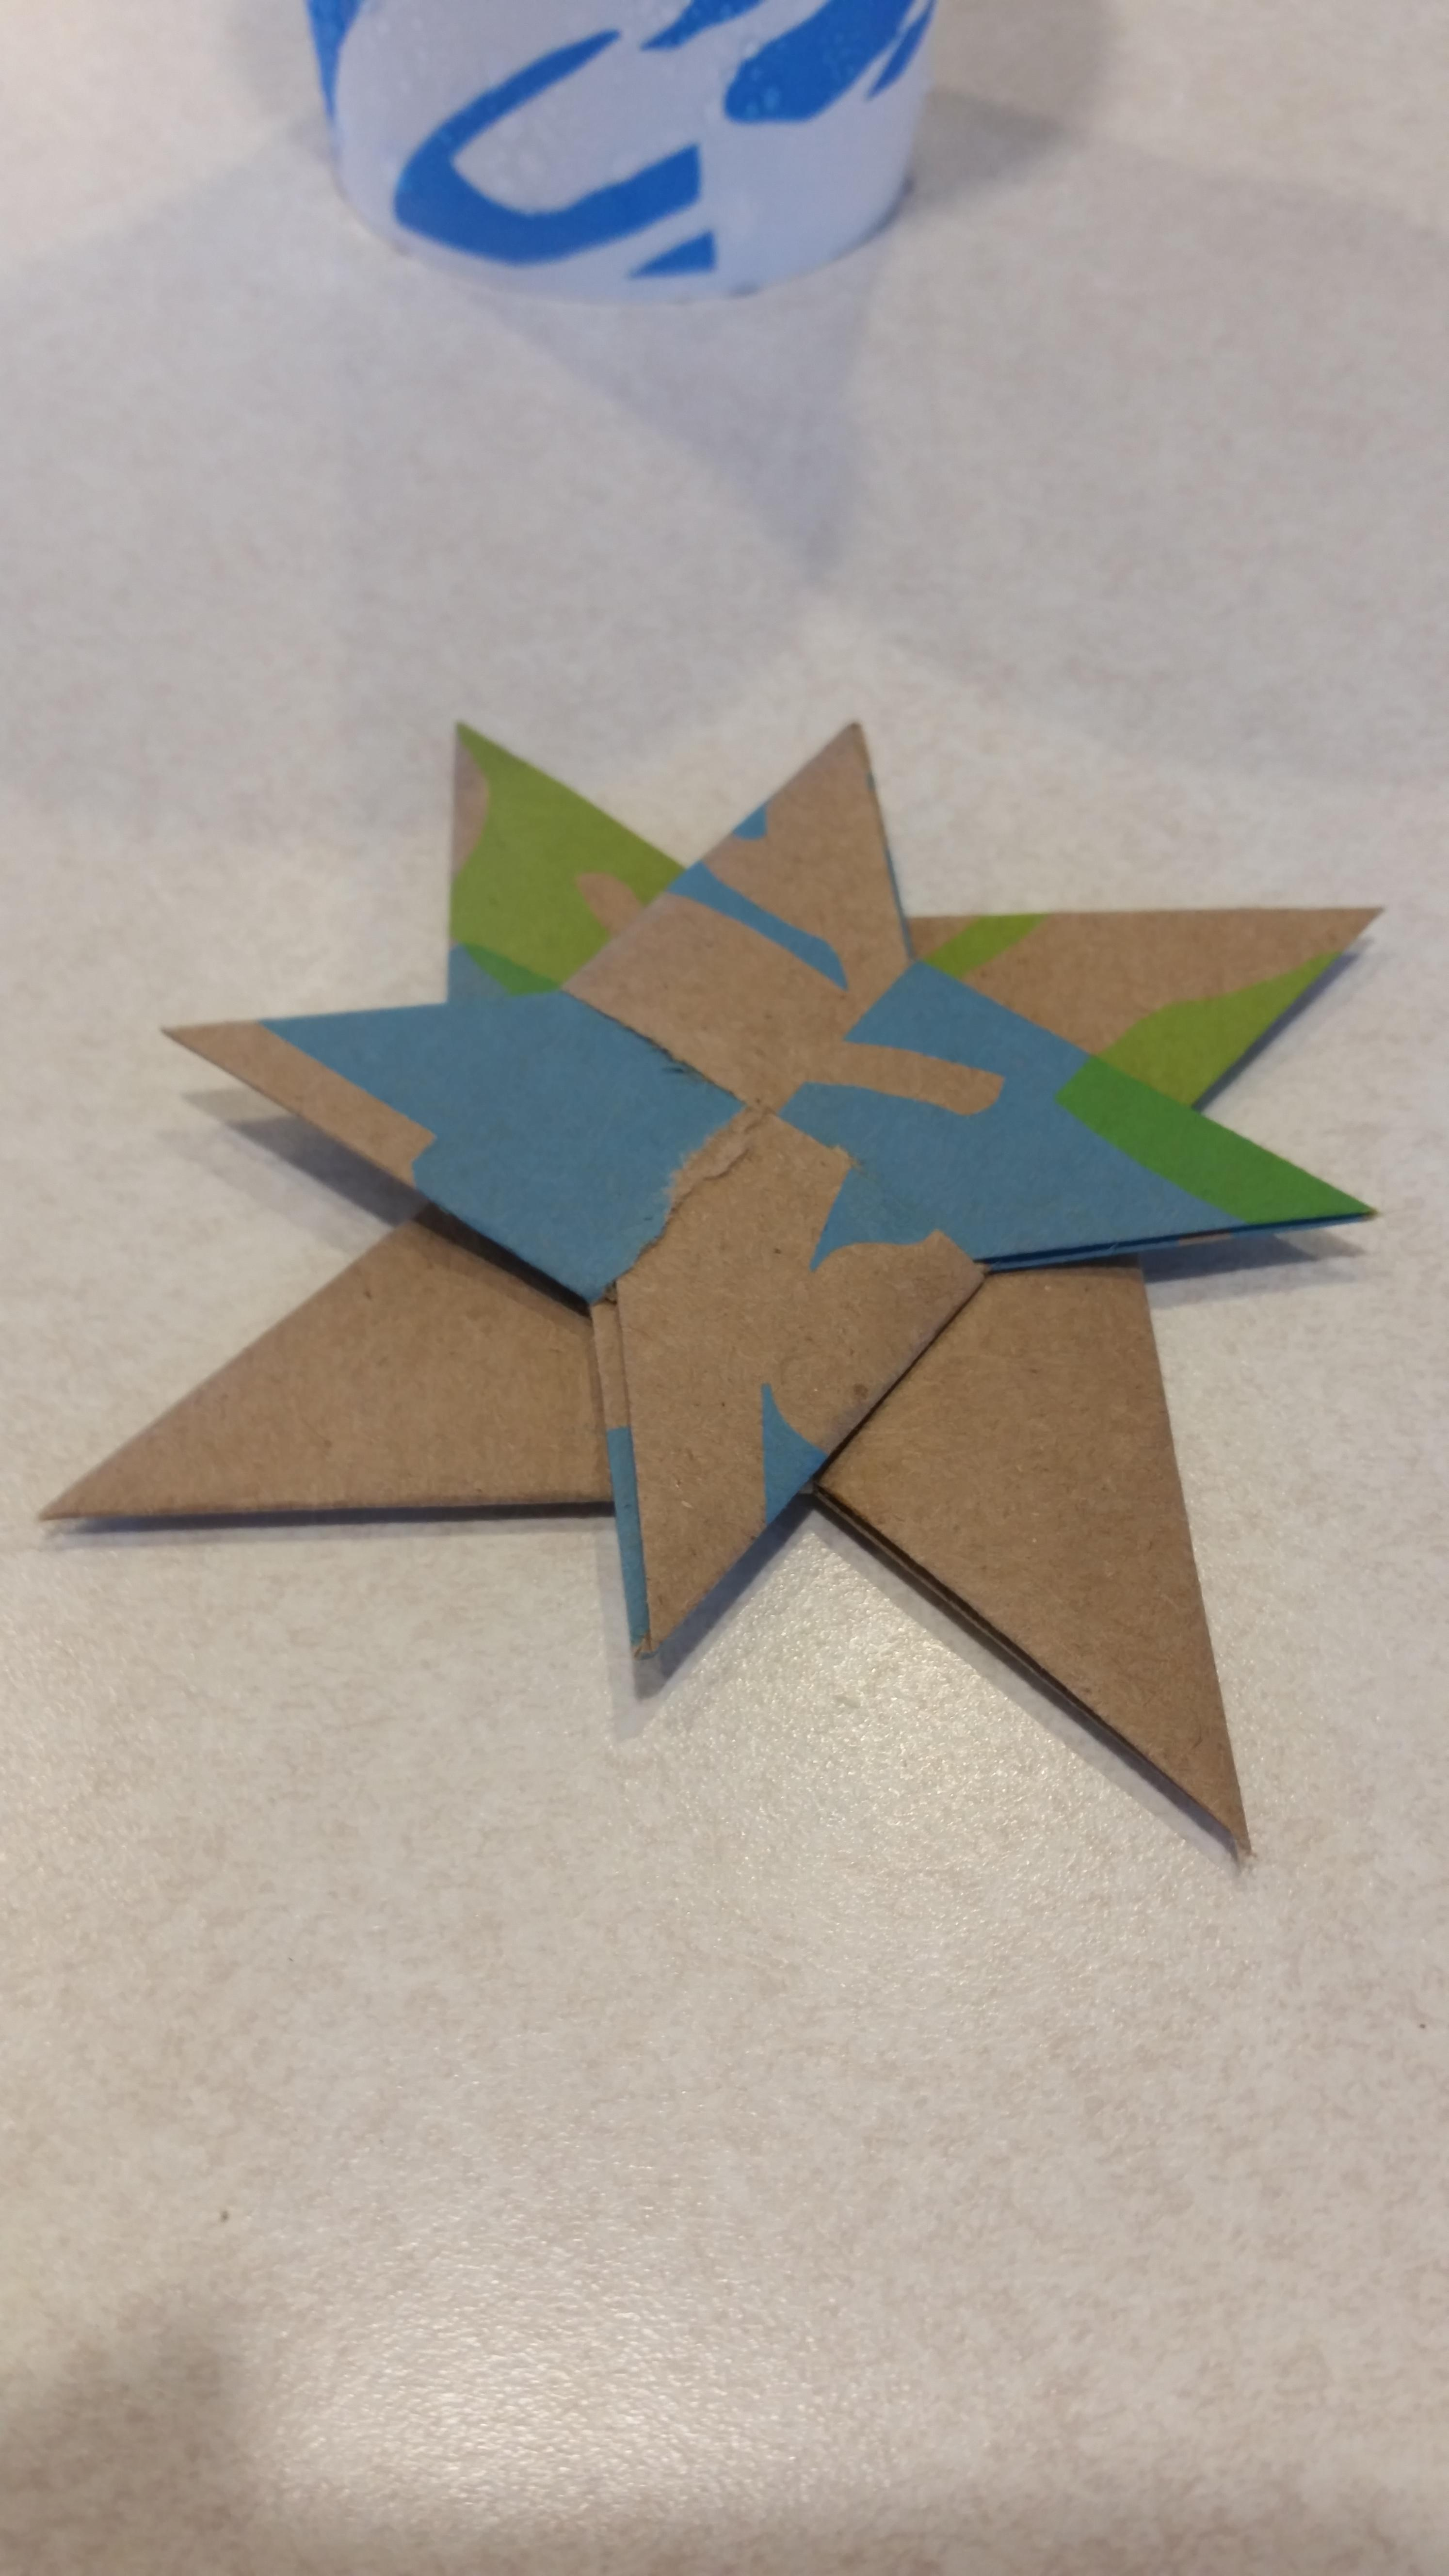 Origami Ninja Stars Made My First Two Origami Ninja Stars Out Of A Paper Bag From Taco